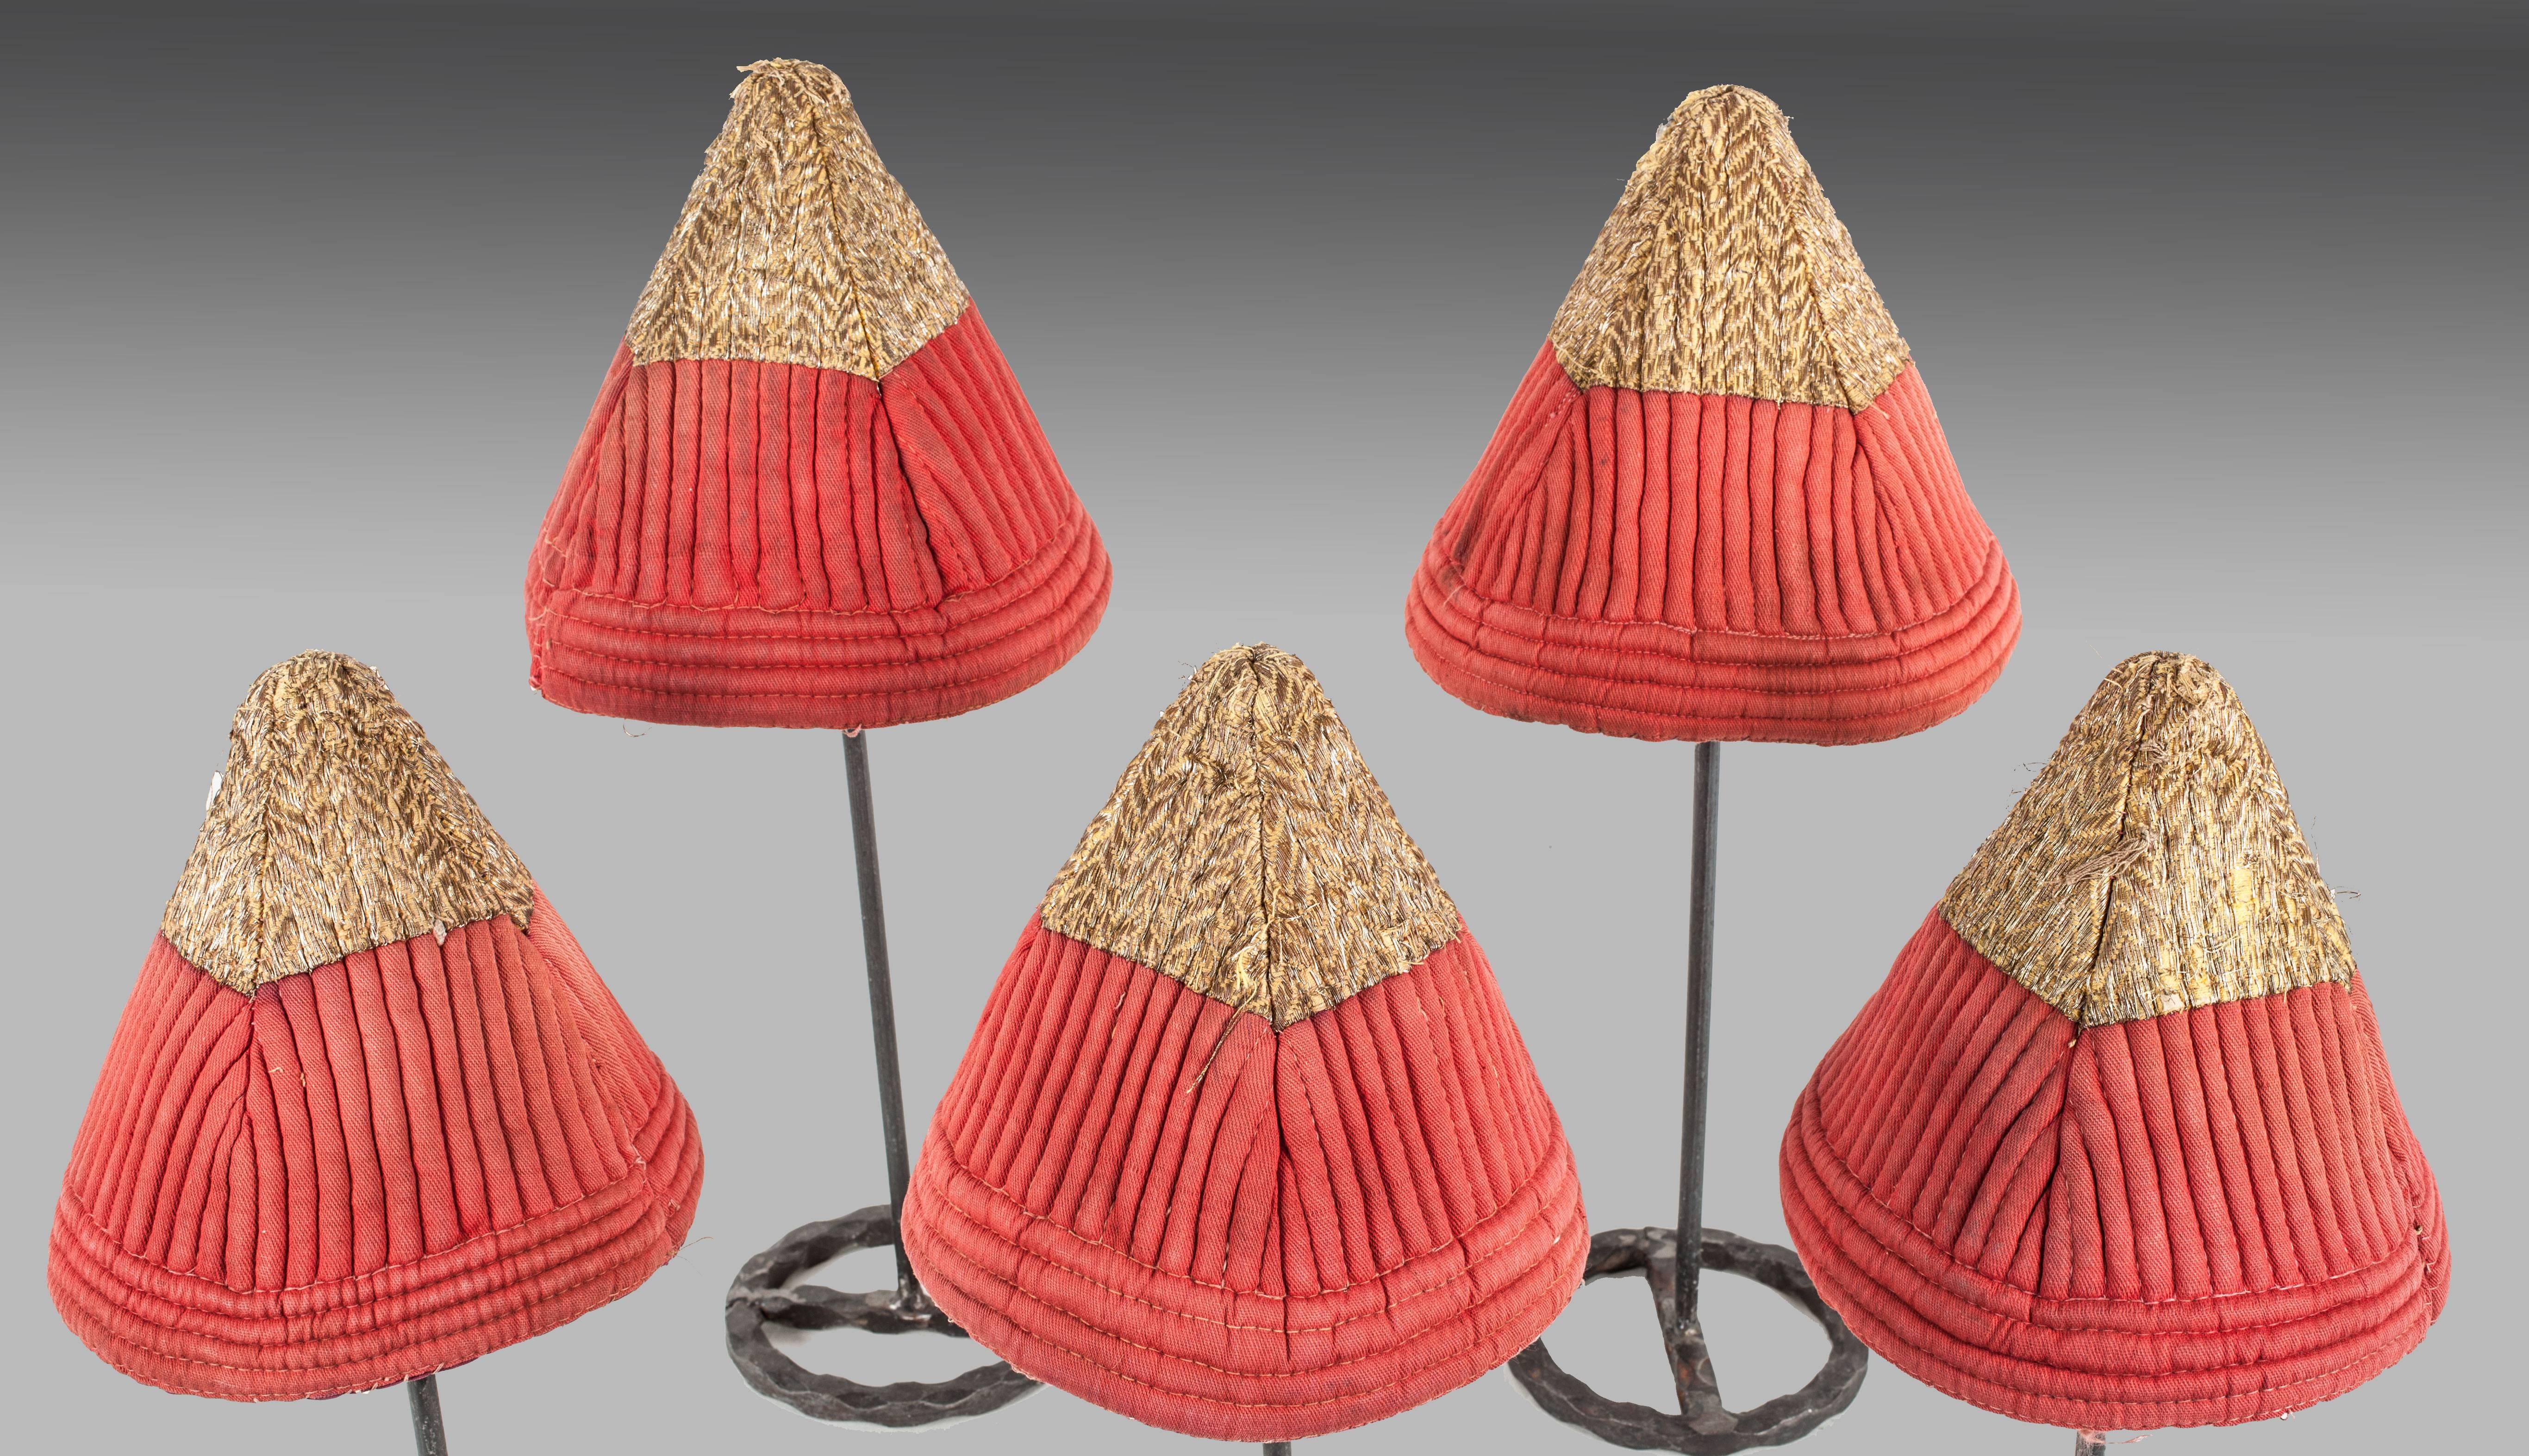 Antique Embroidered Hats, Set of Five, Central Asia, Late 19th Century In Good Condition For Sale In By Appointment Only, CA